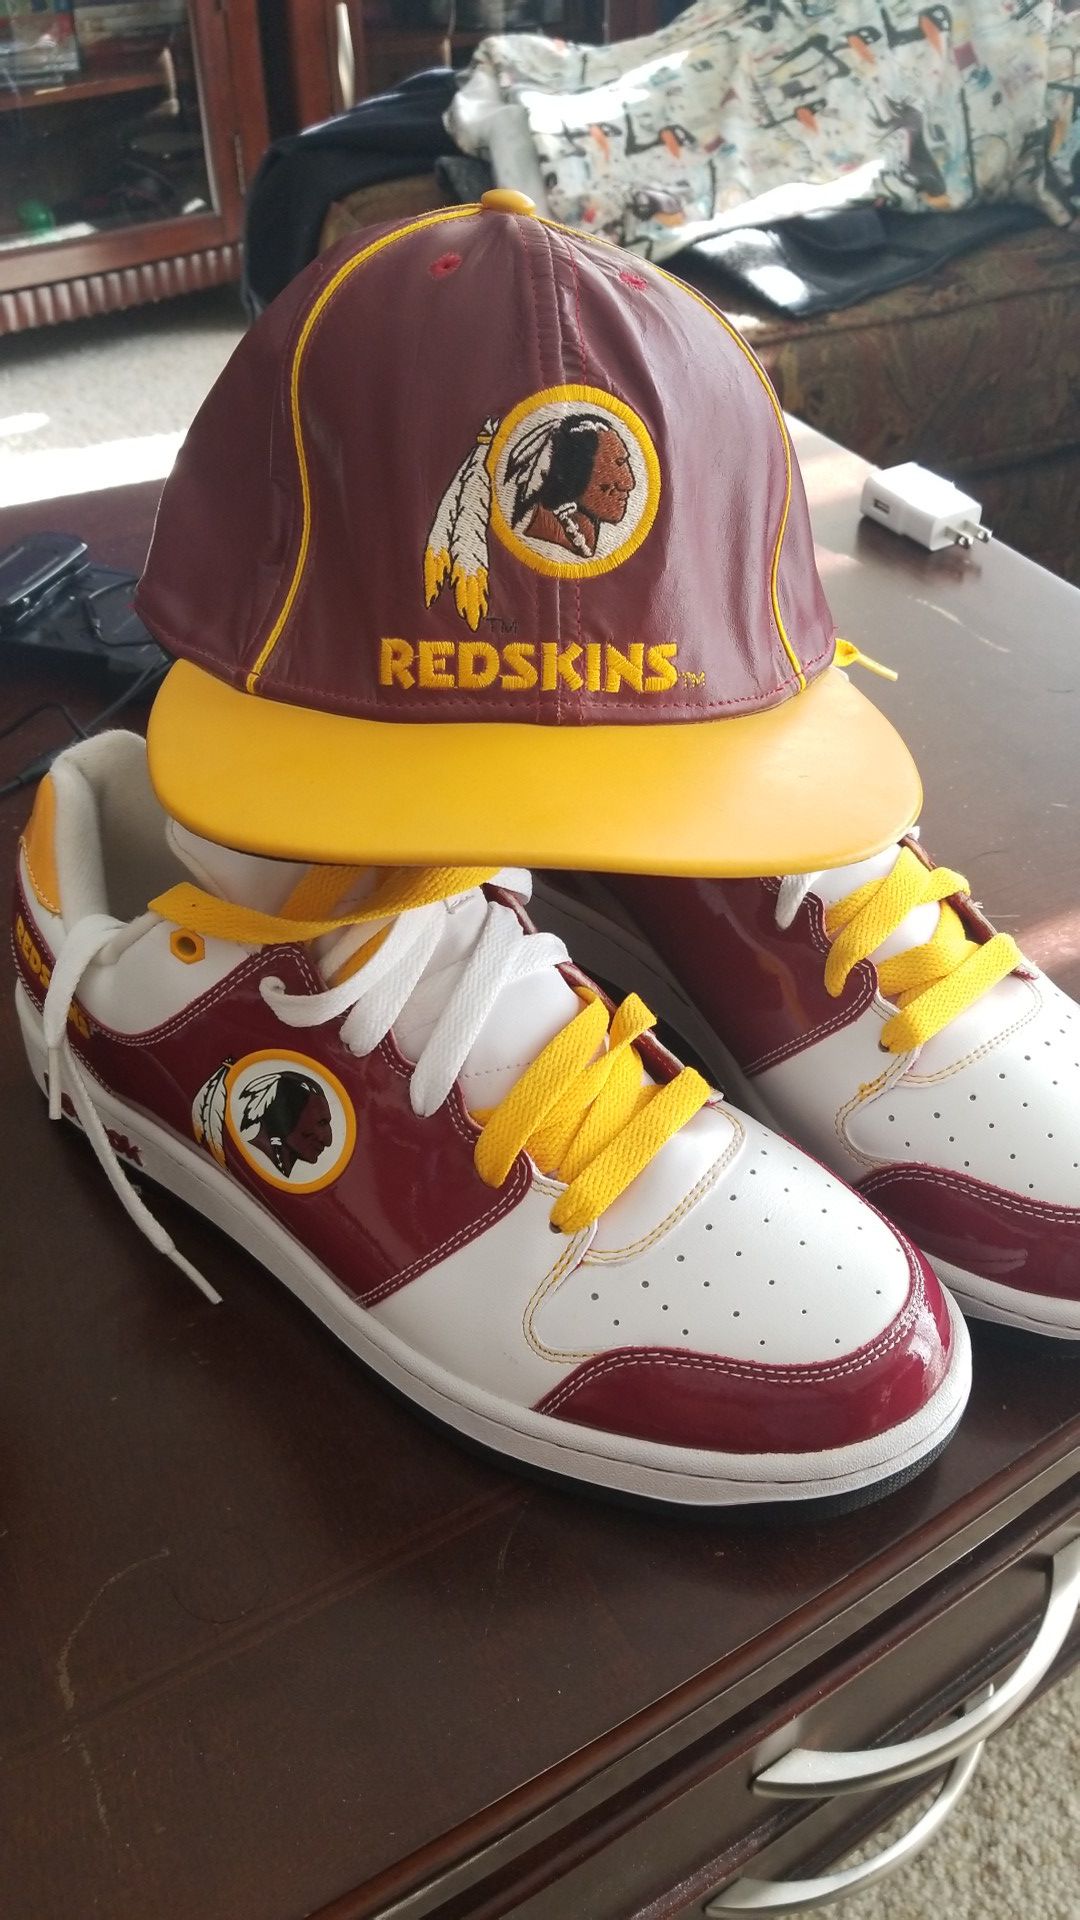 Reebok size 11 REDSKINS SNEAKERS & LEATHER HAT